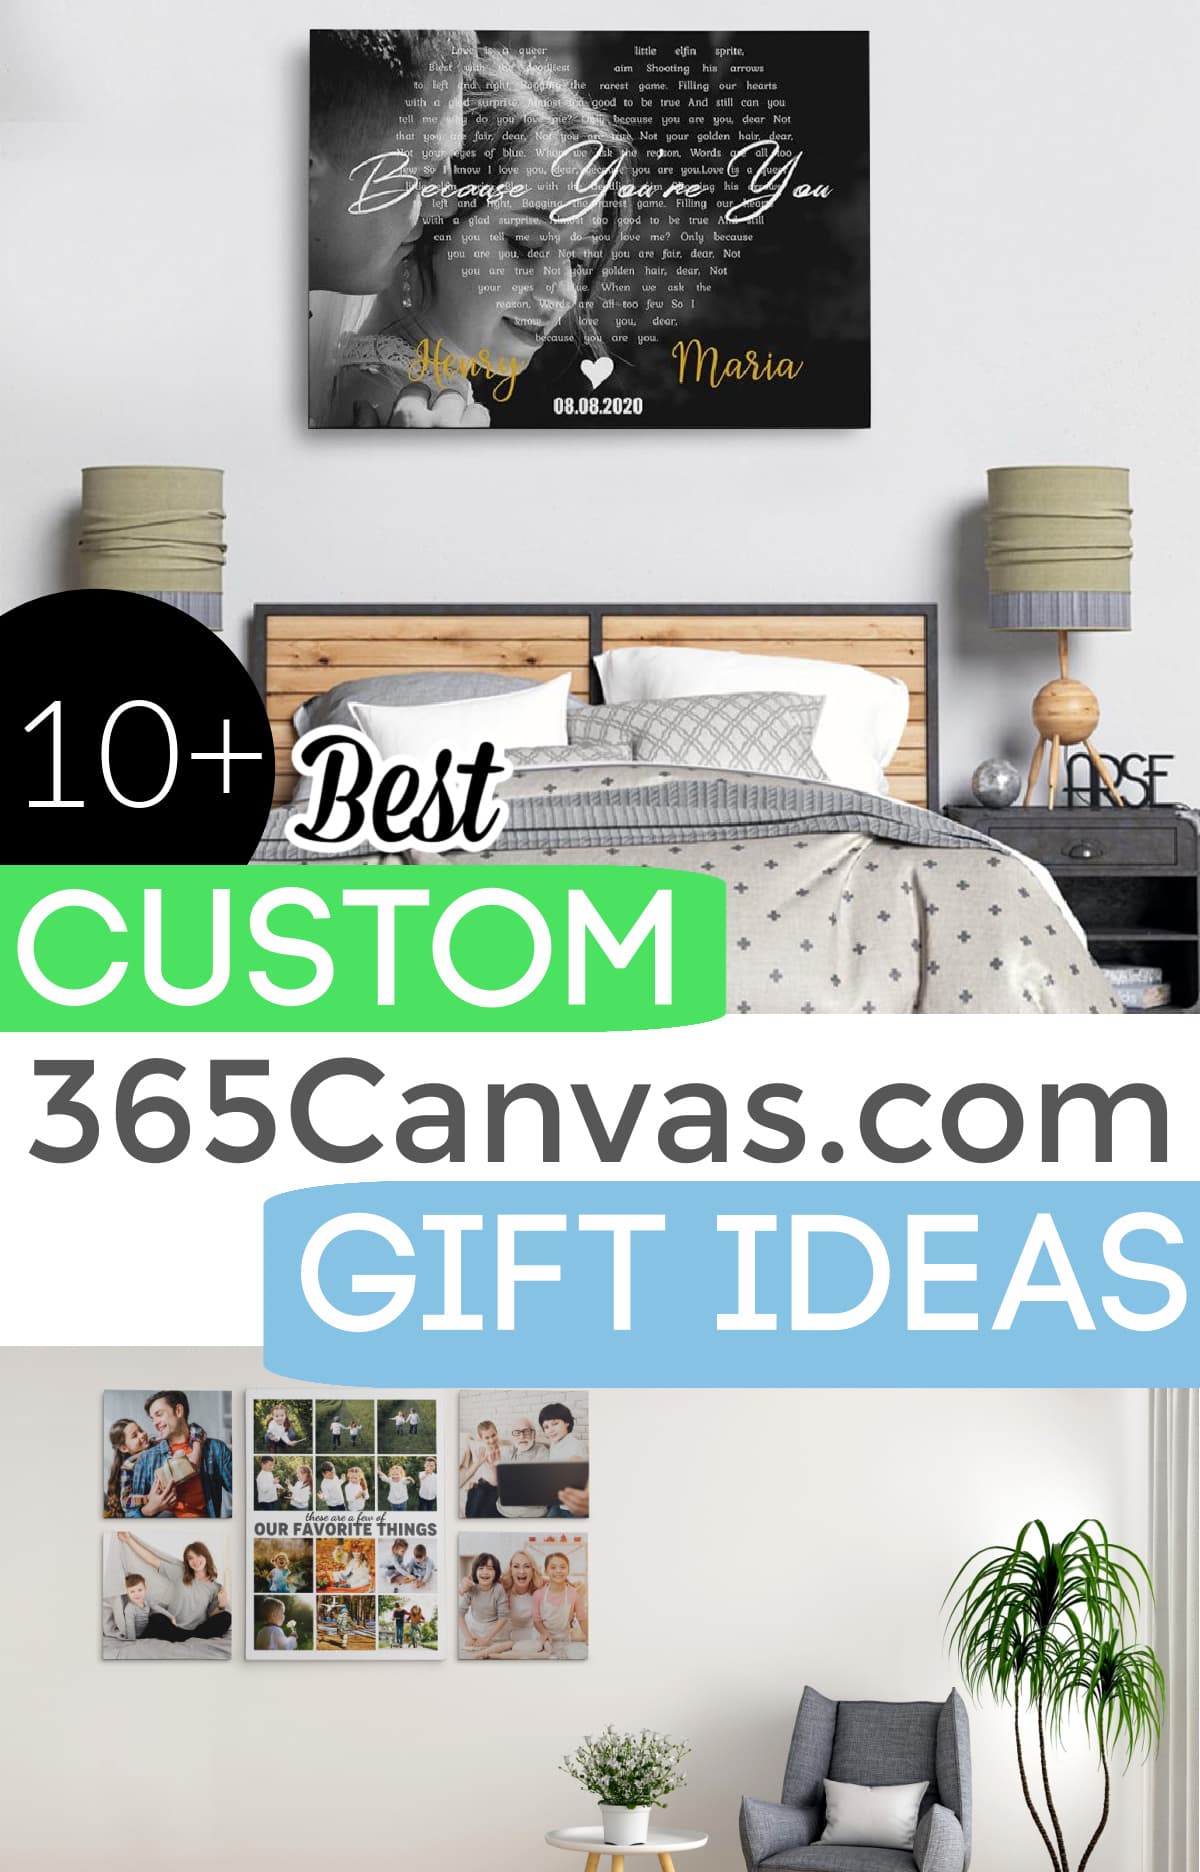 Top 10+ Custom Gift Ideas From 365Canvas + Discount Code 